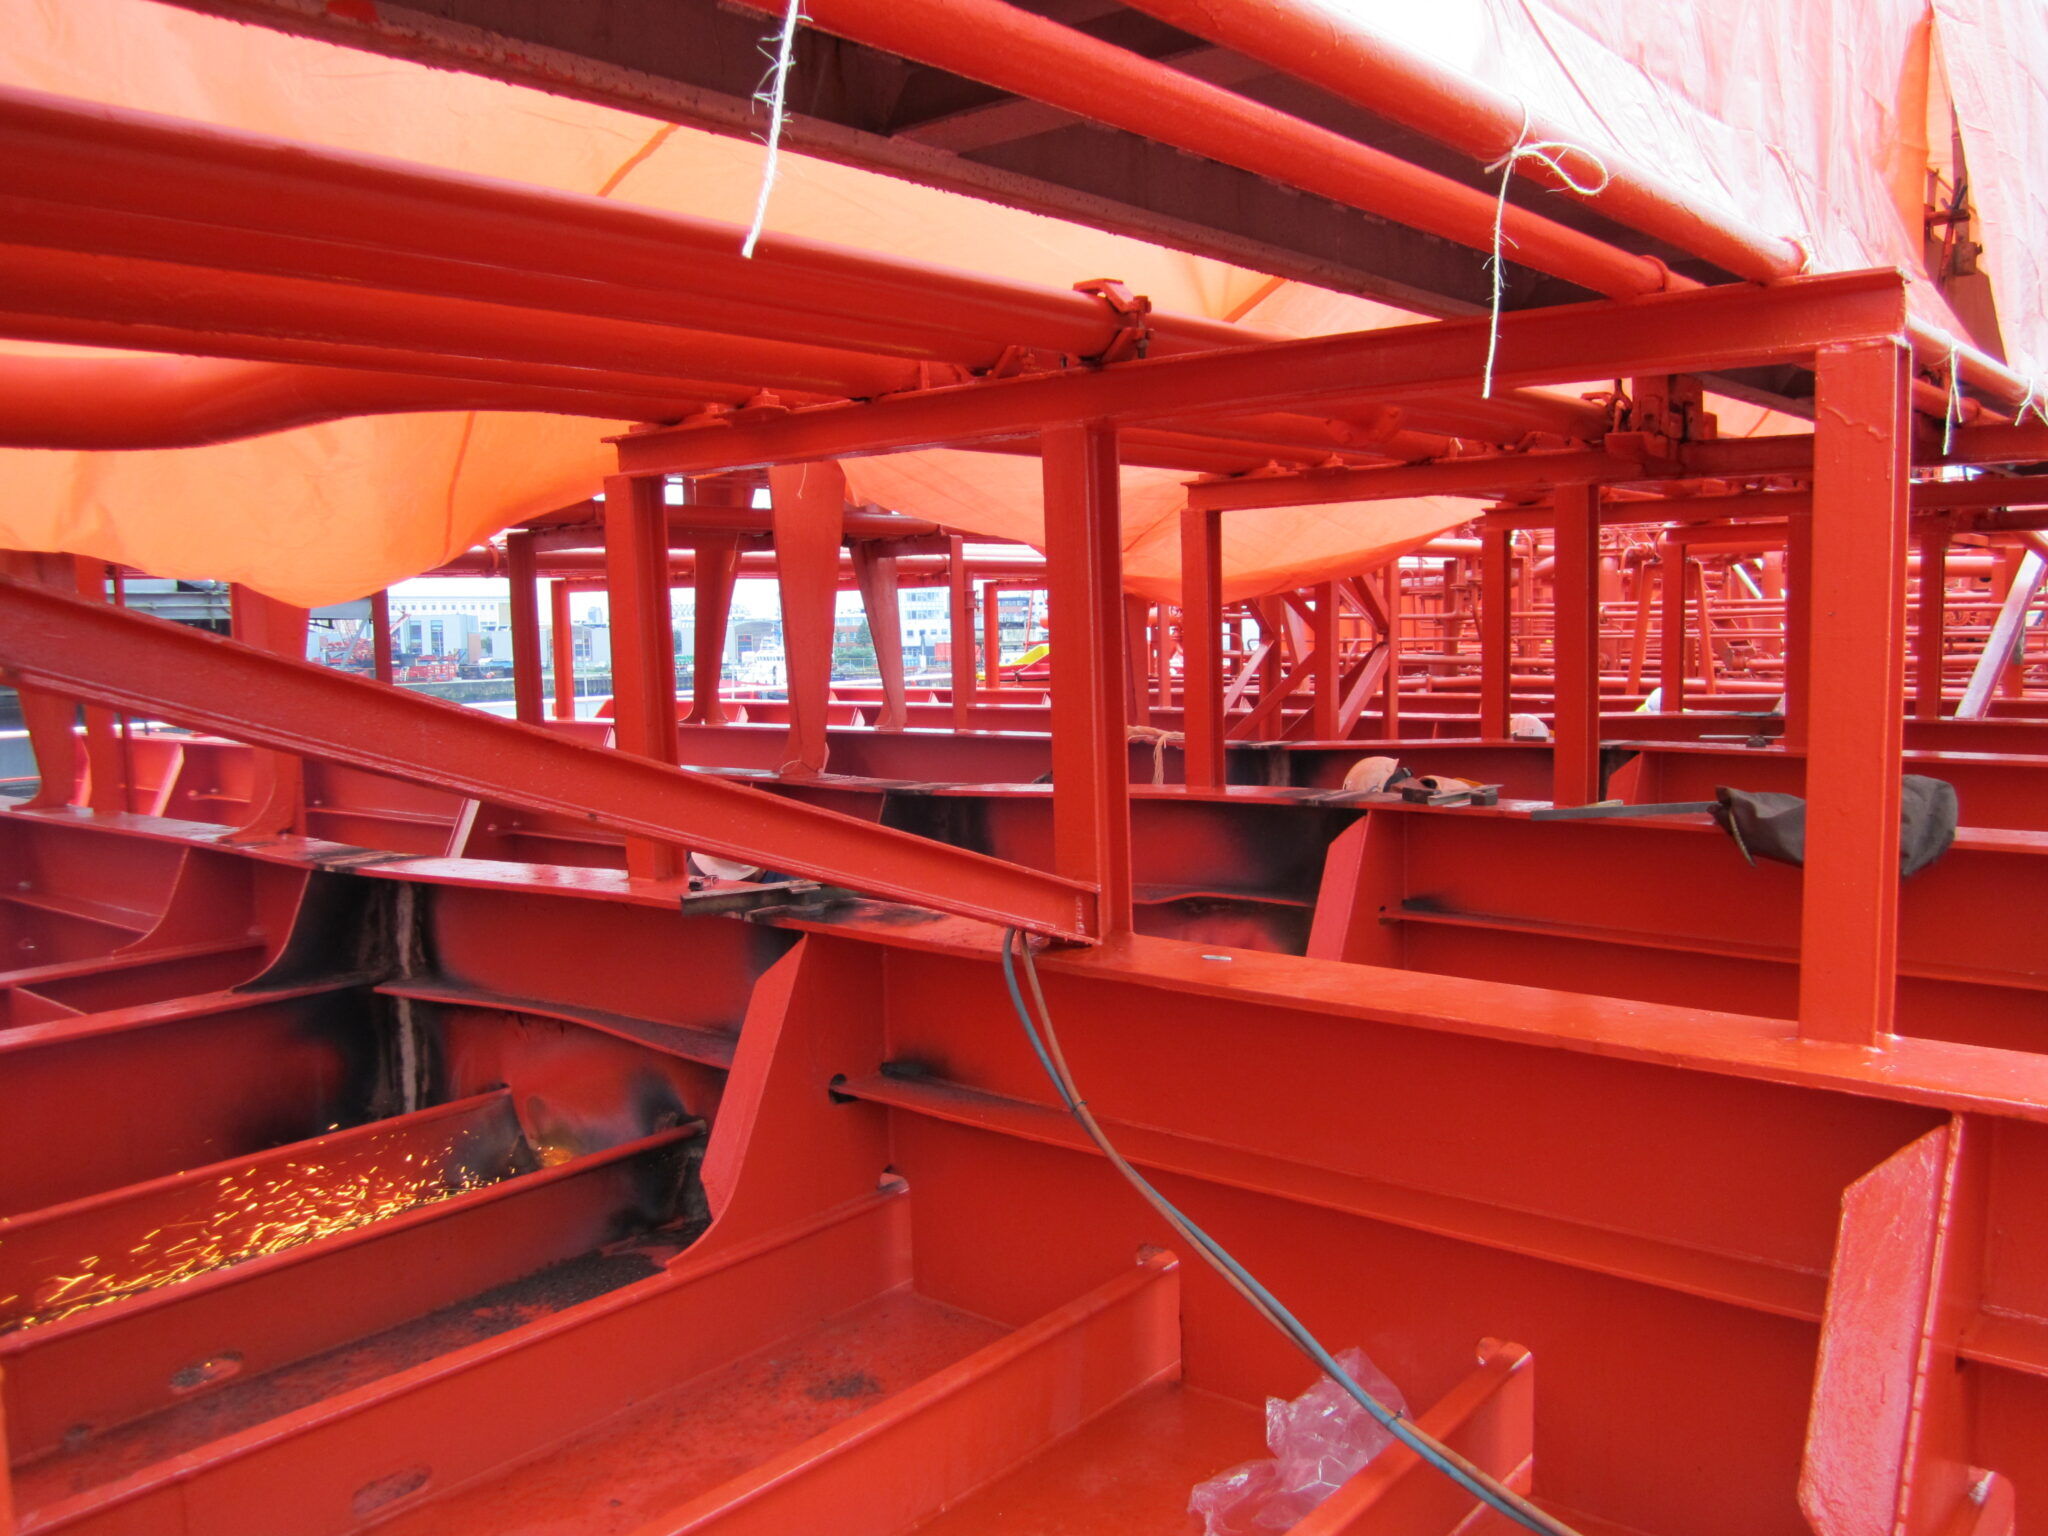 Frame deformation on the deck of a tanker vessel due to over pressurization of cargo tanks. You can see the beams and deck bulging and buckling.